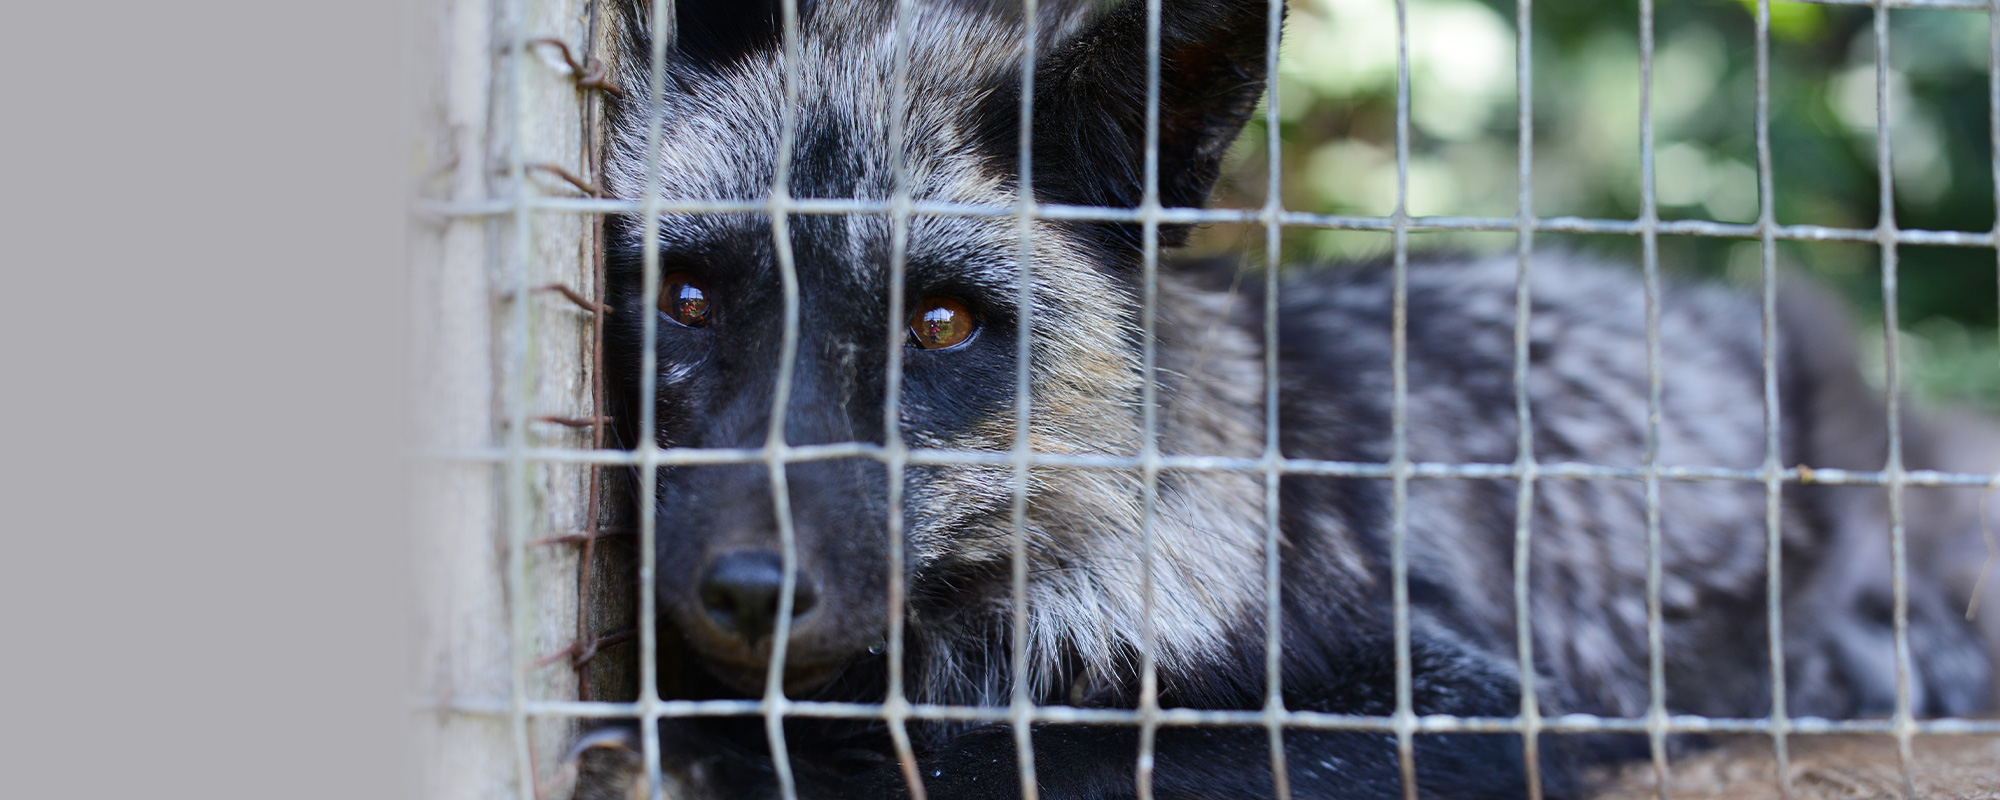 MRN (Quebec government - Ministry of Natural Ressources) fur farm case